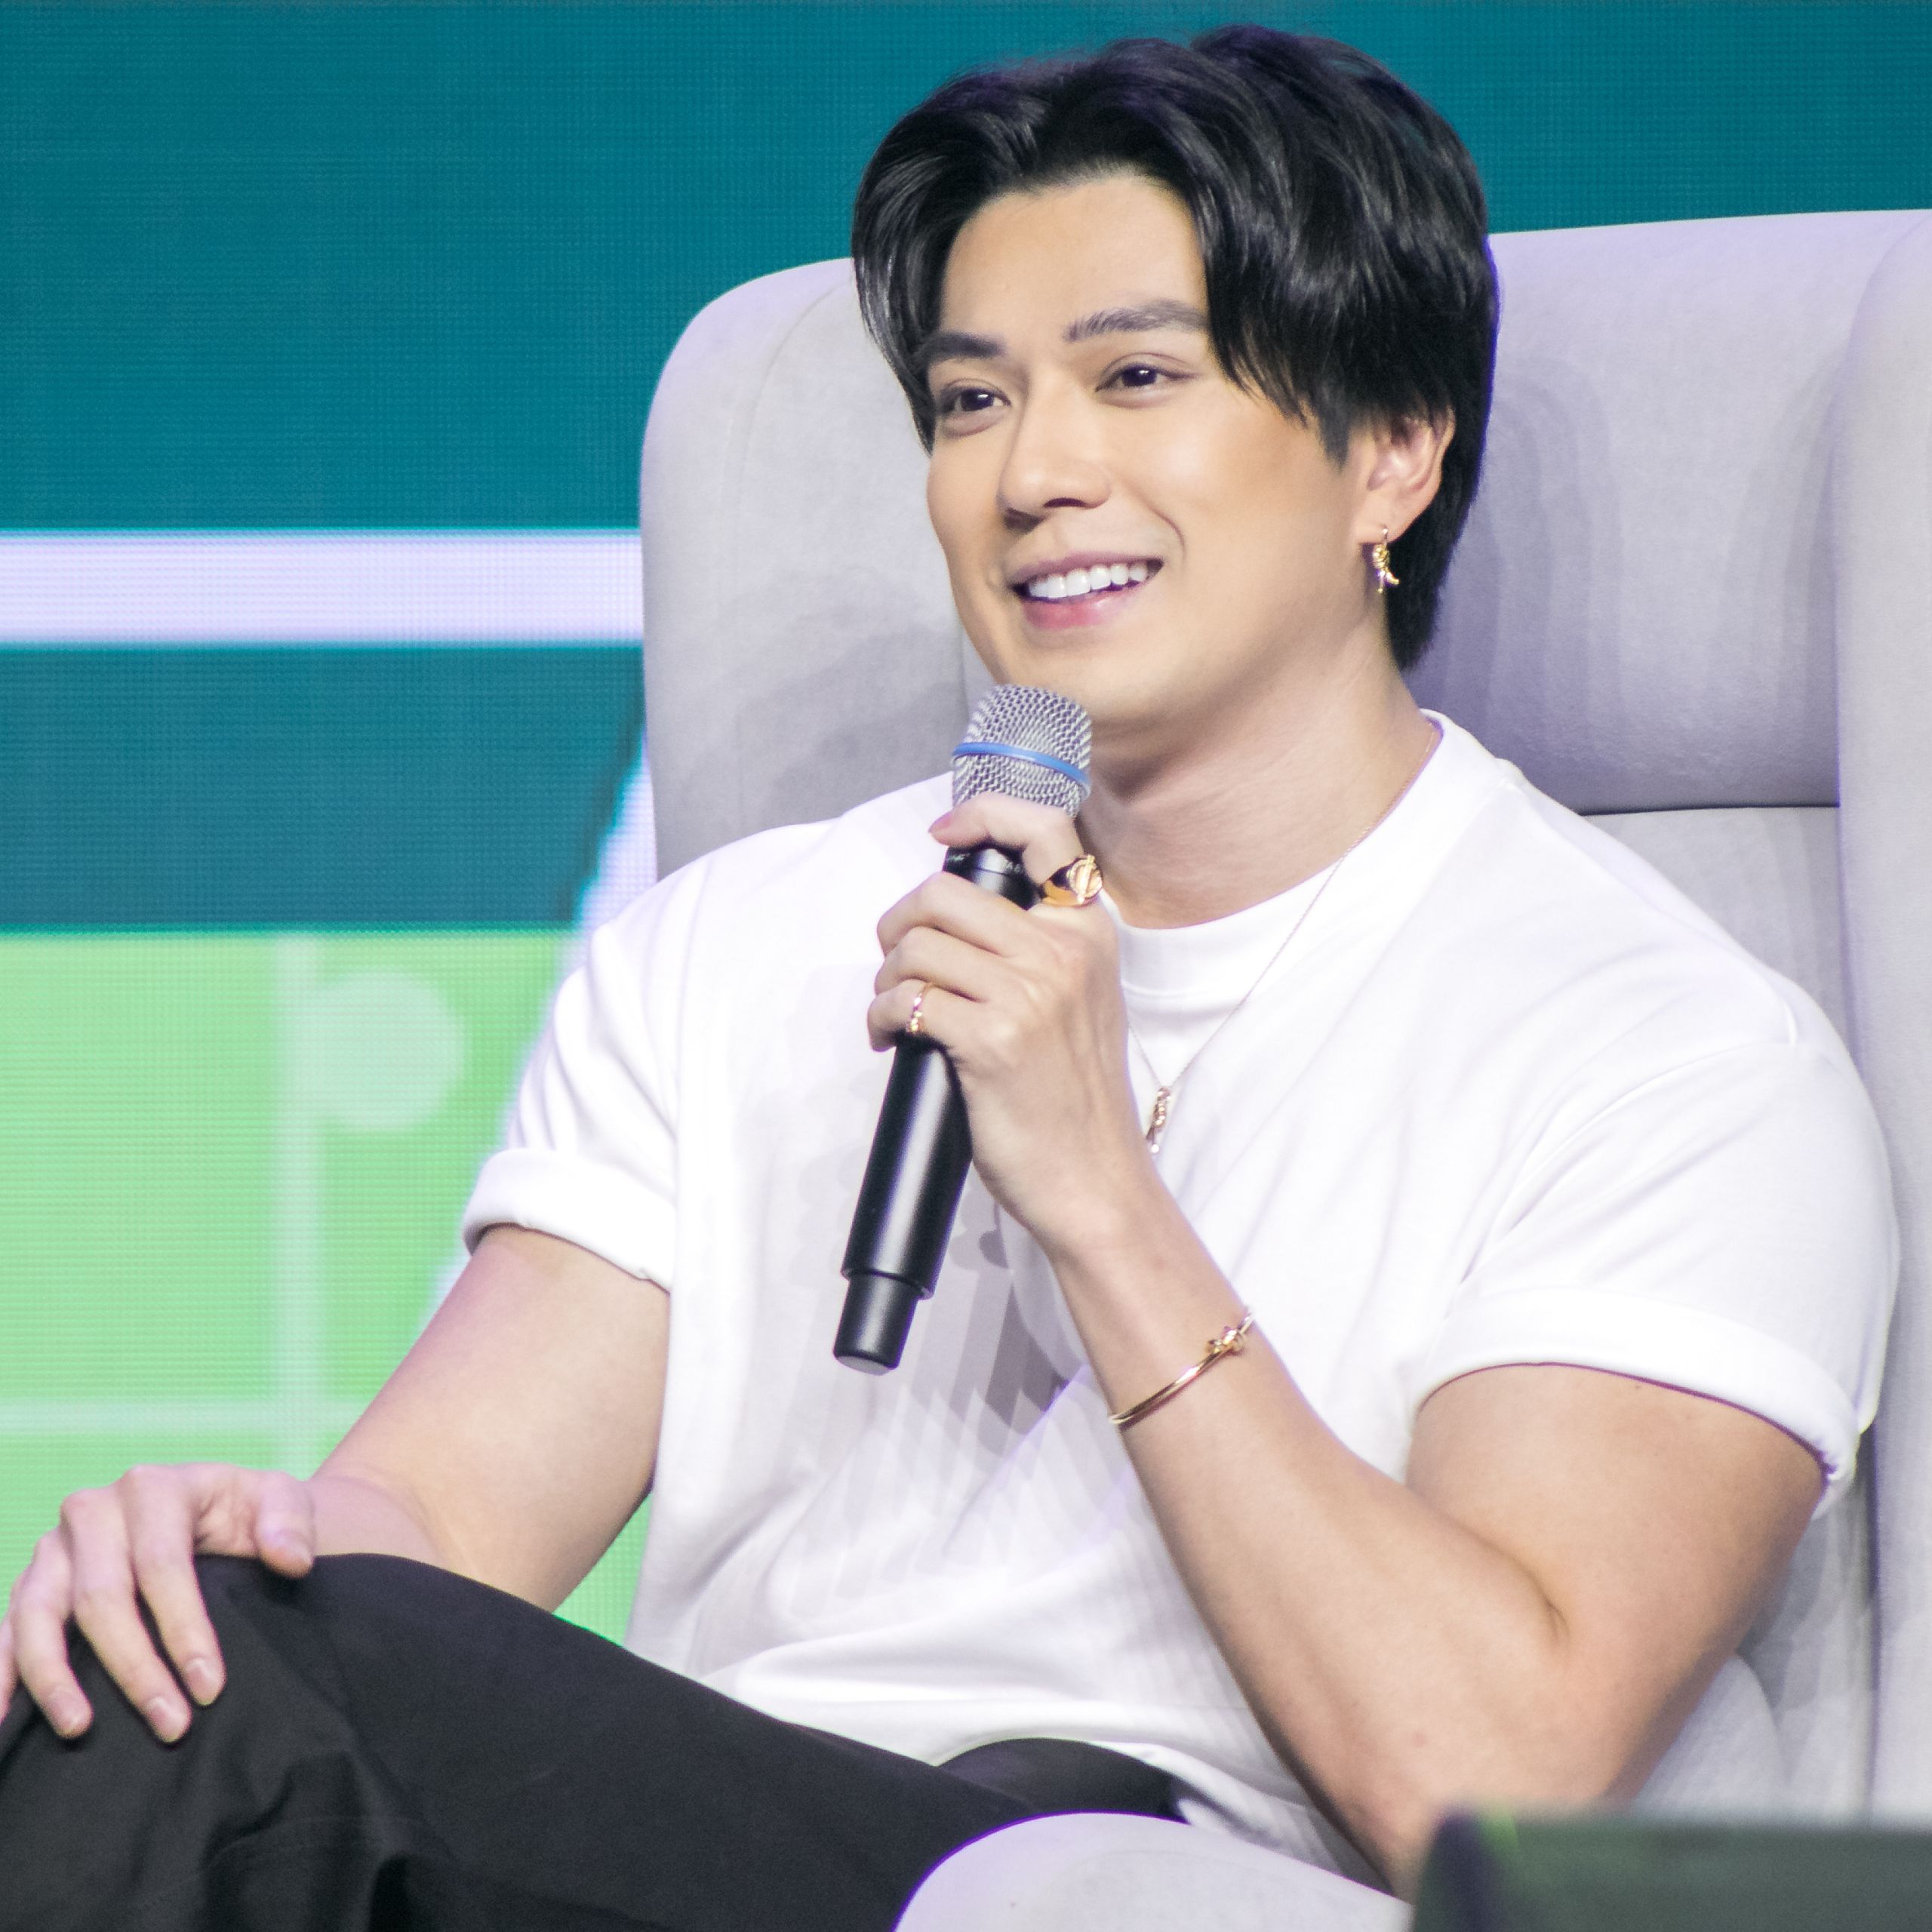 Here's Why Mackenyu Wants to Come Back to the Philippines